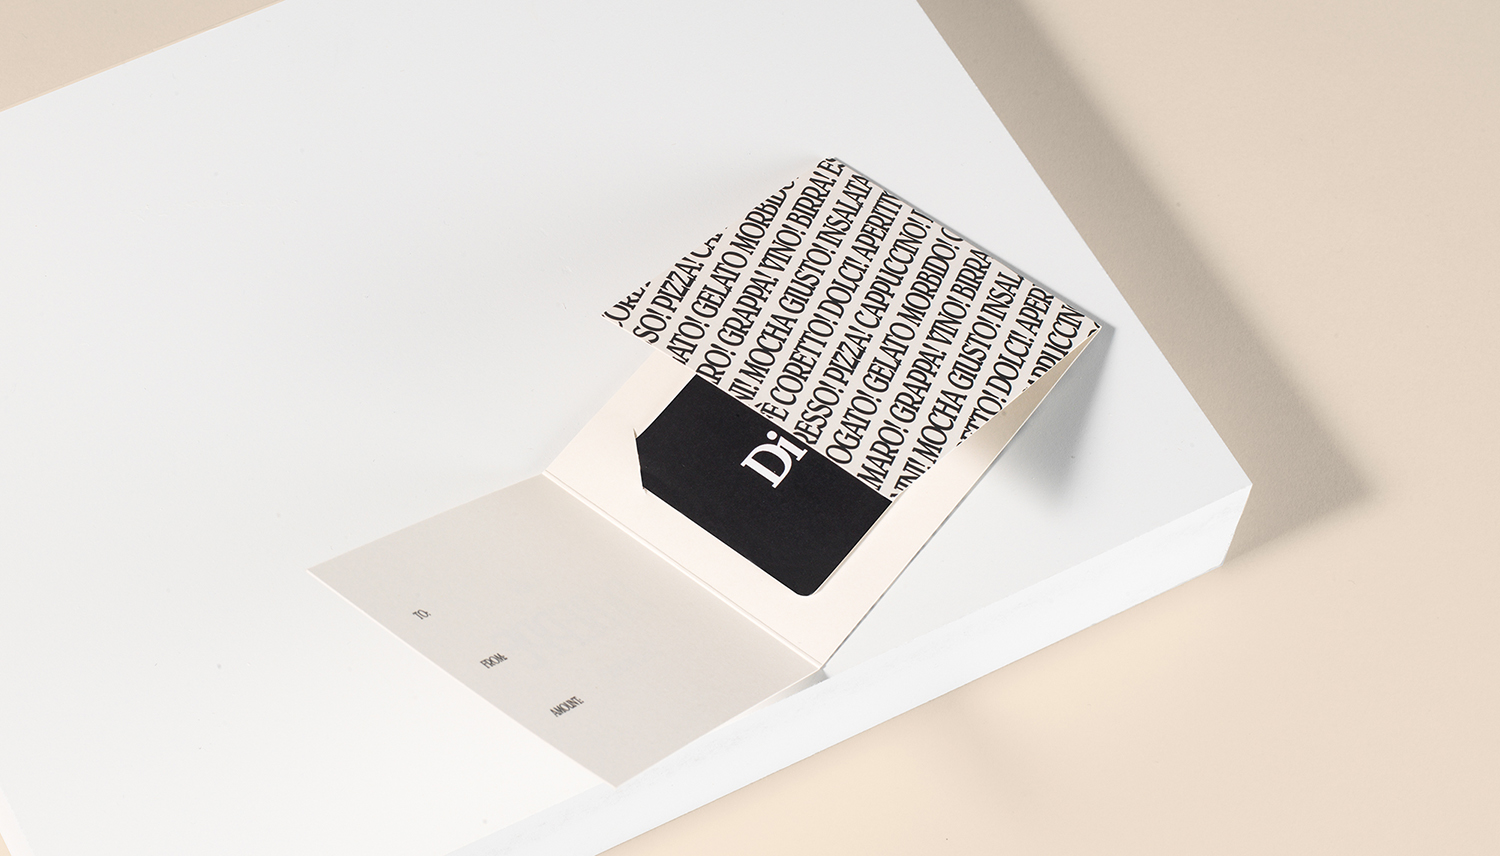 Logo and gift card design by Glasfurd & Walker for Italian caffé and ristorante Di Beppe